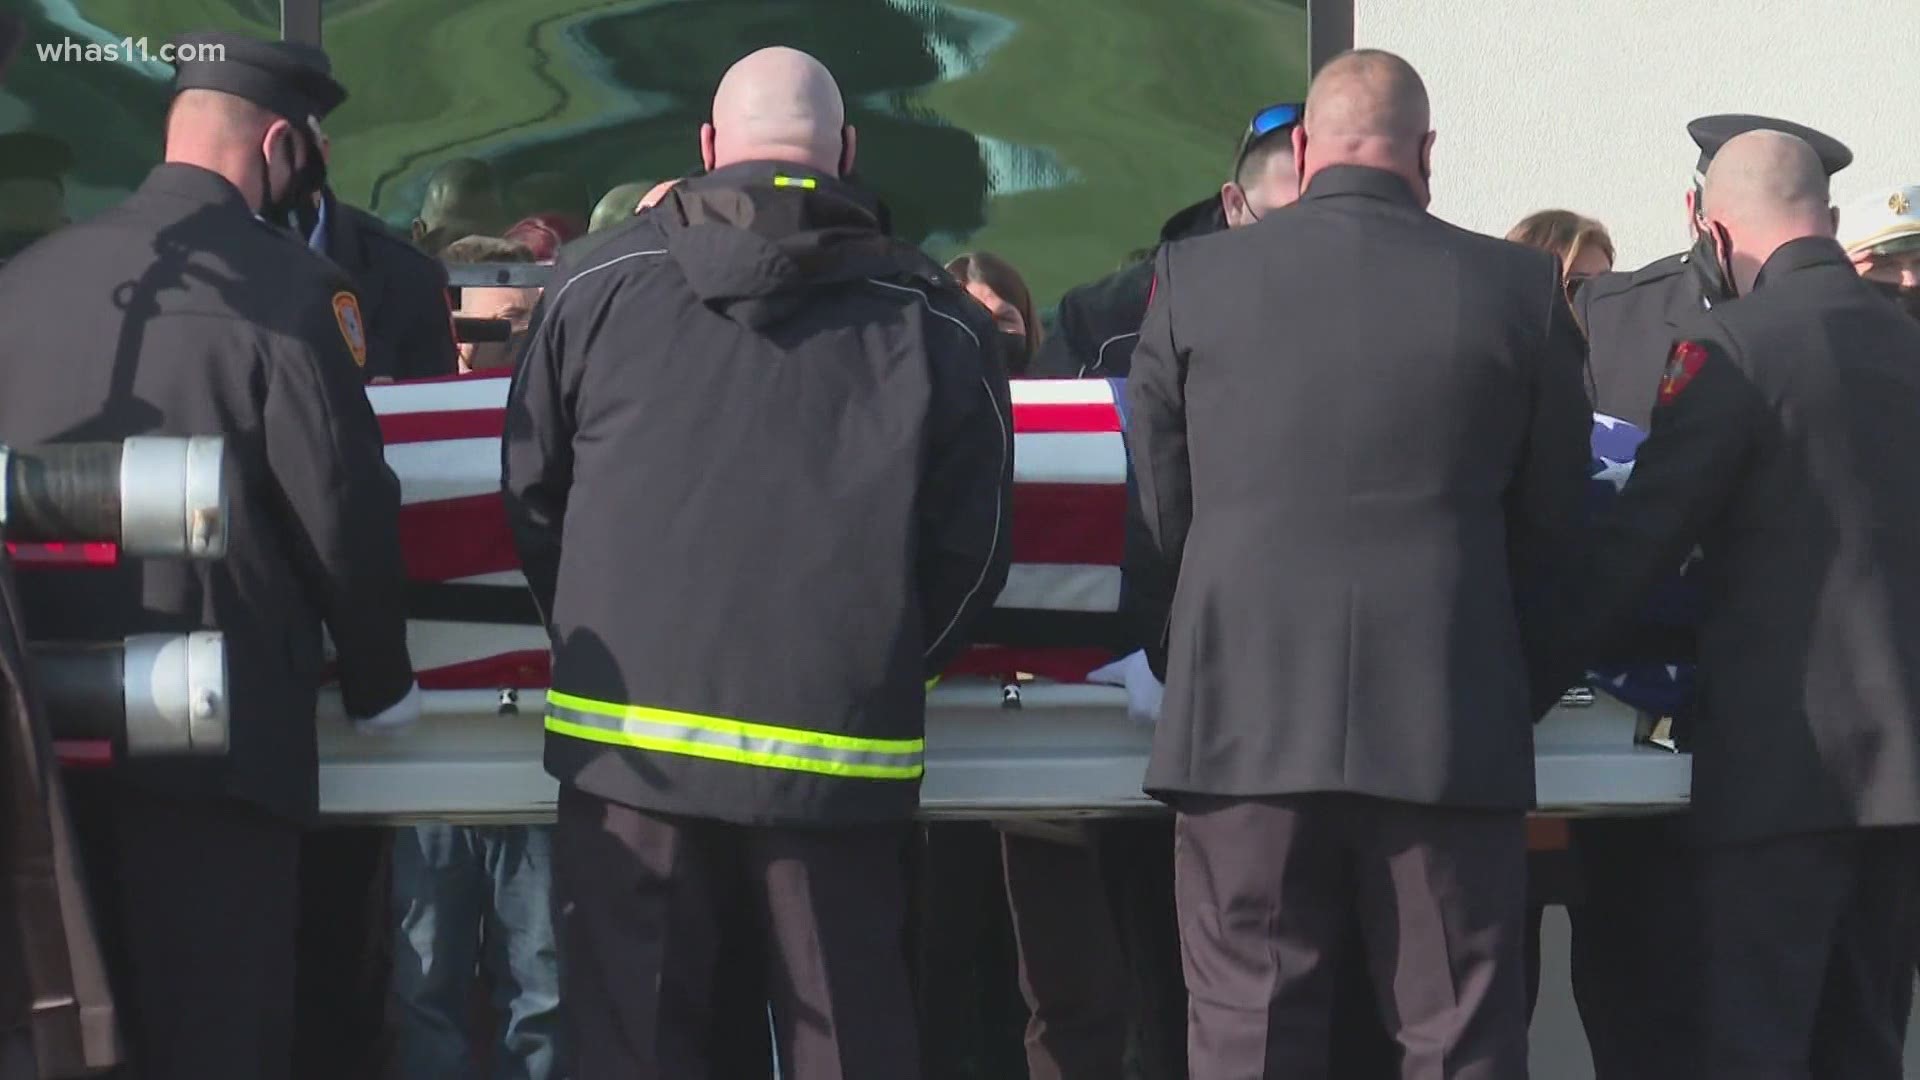 A Fire chief who served his community to save lives for more than 30 years was laid to rest today.